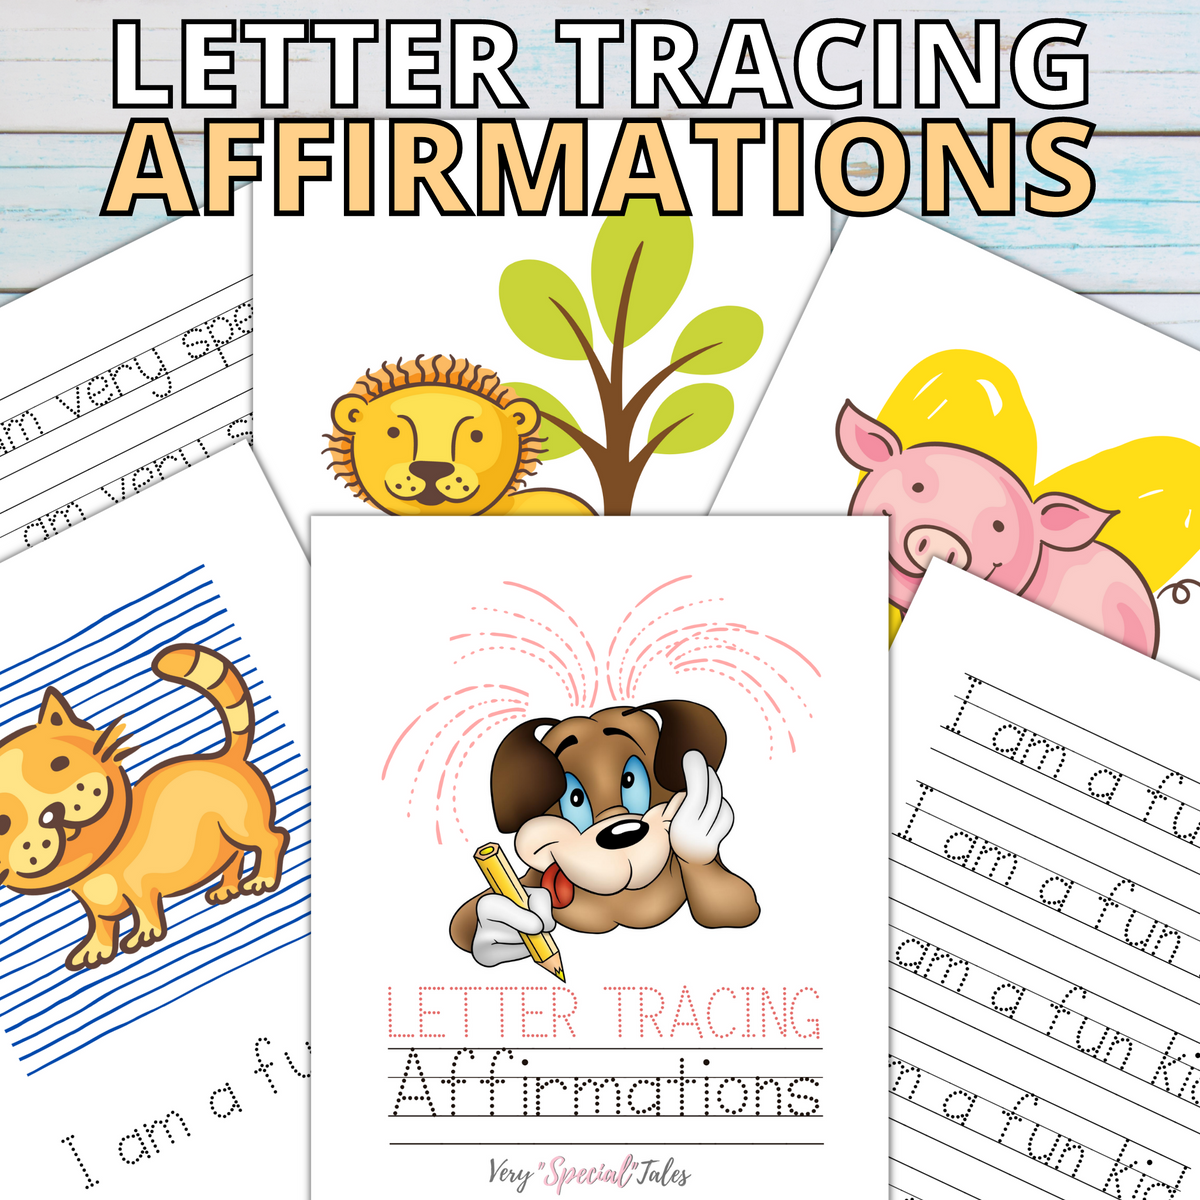 Worksheets containing playful animal illustrations and letter-tracing activities for children.